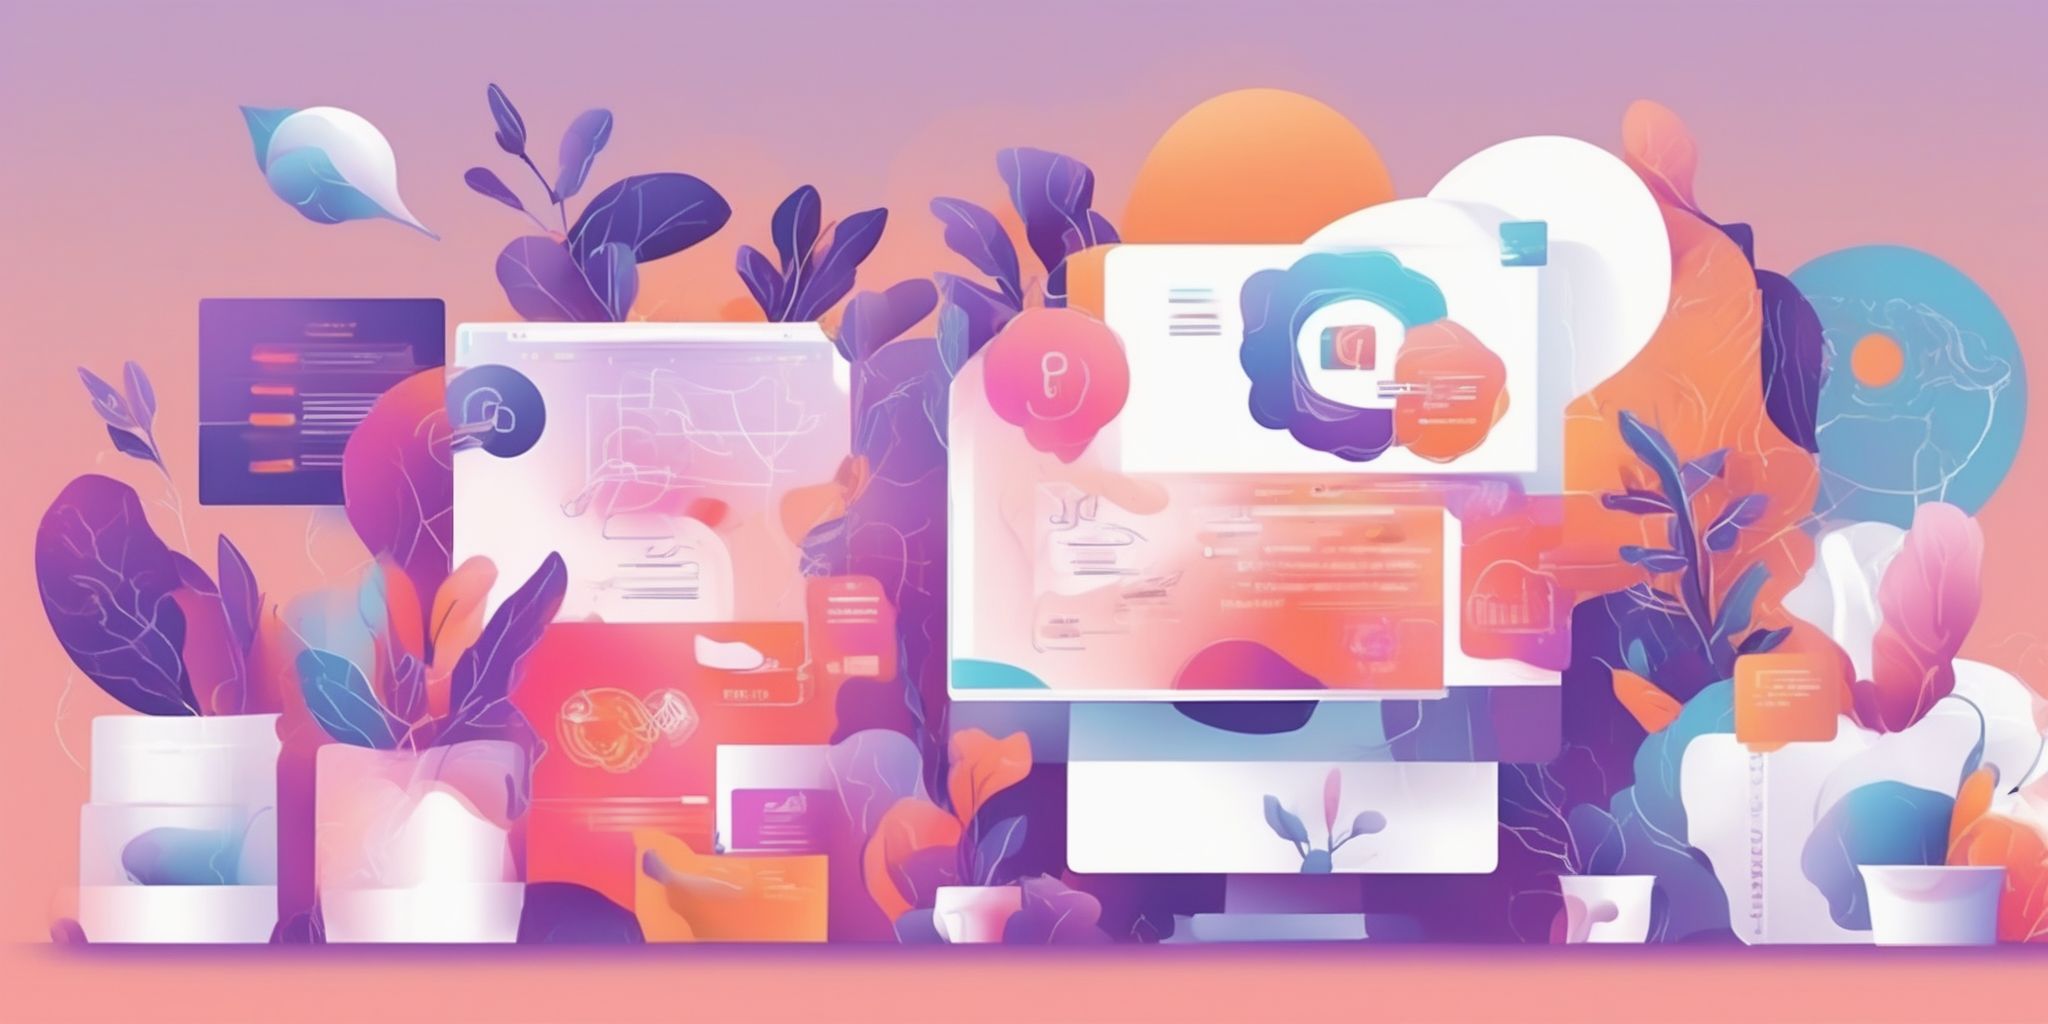 Online branding secrets in illustration style with gradients and white background